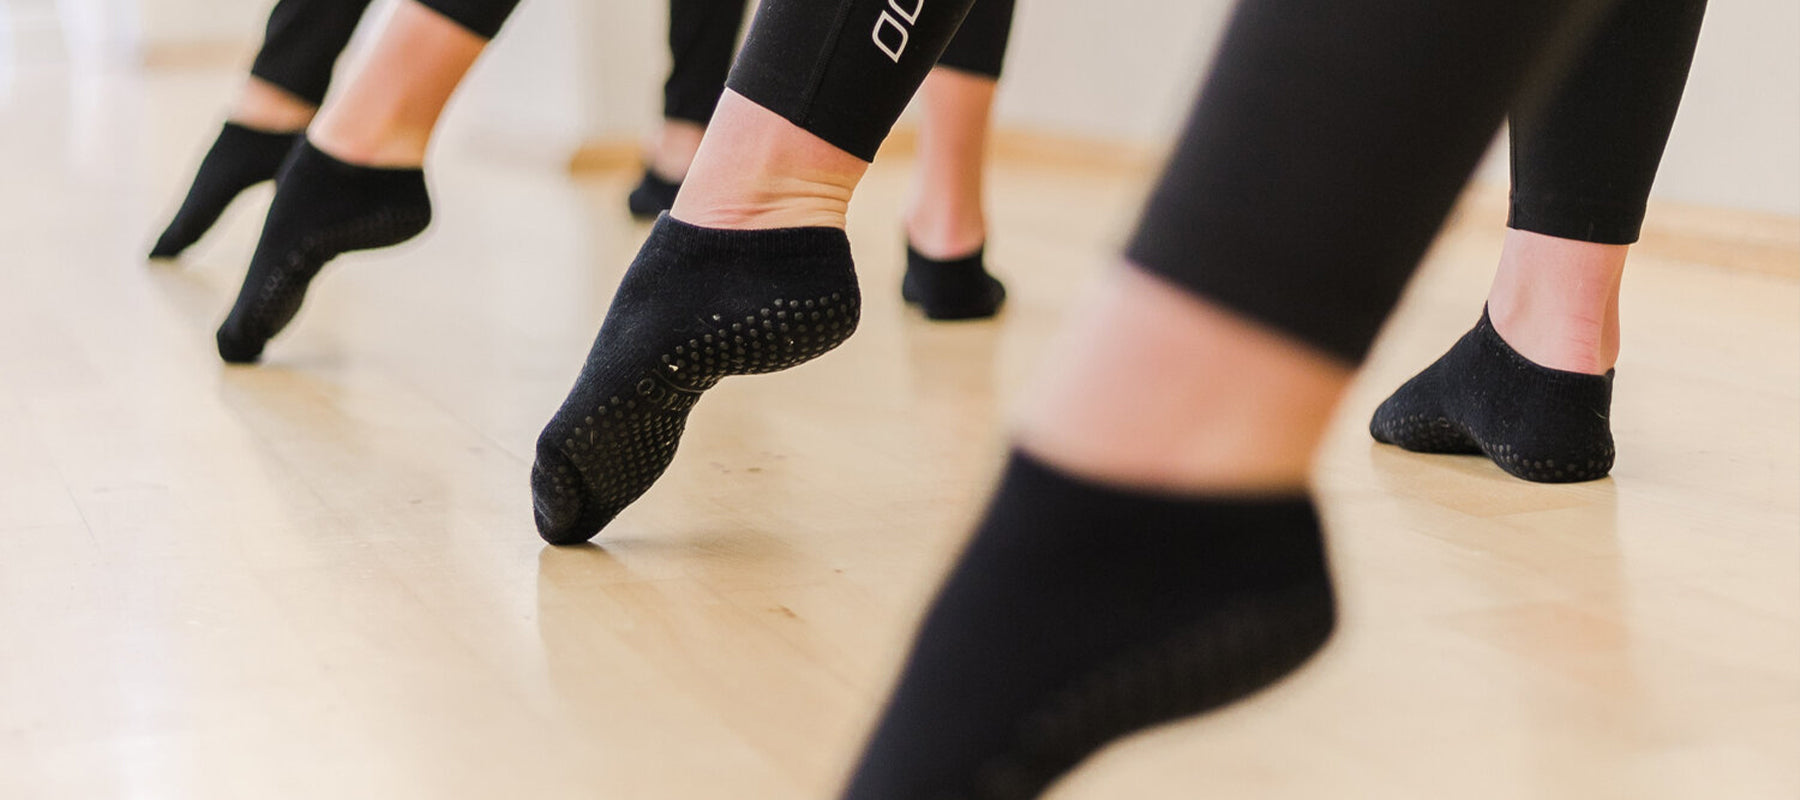 What are Yoga Socks and do I need them? - SOCK IT AND CO.®